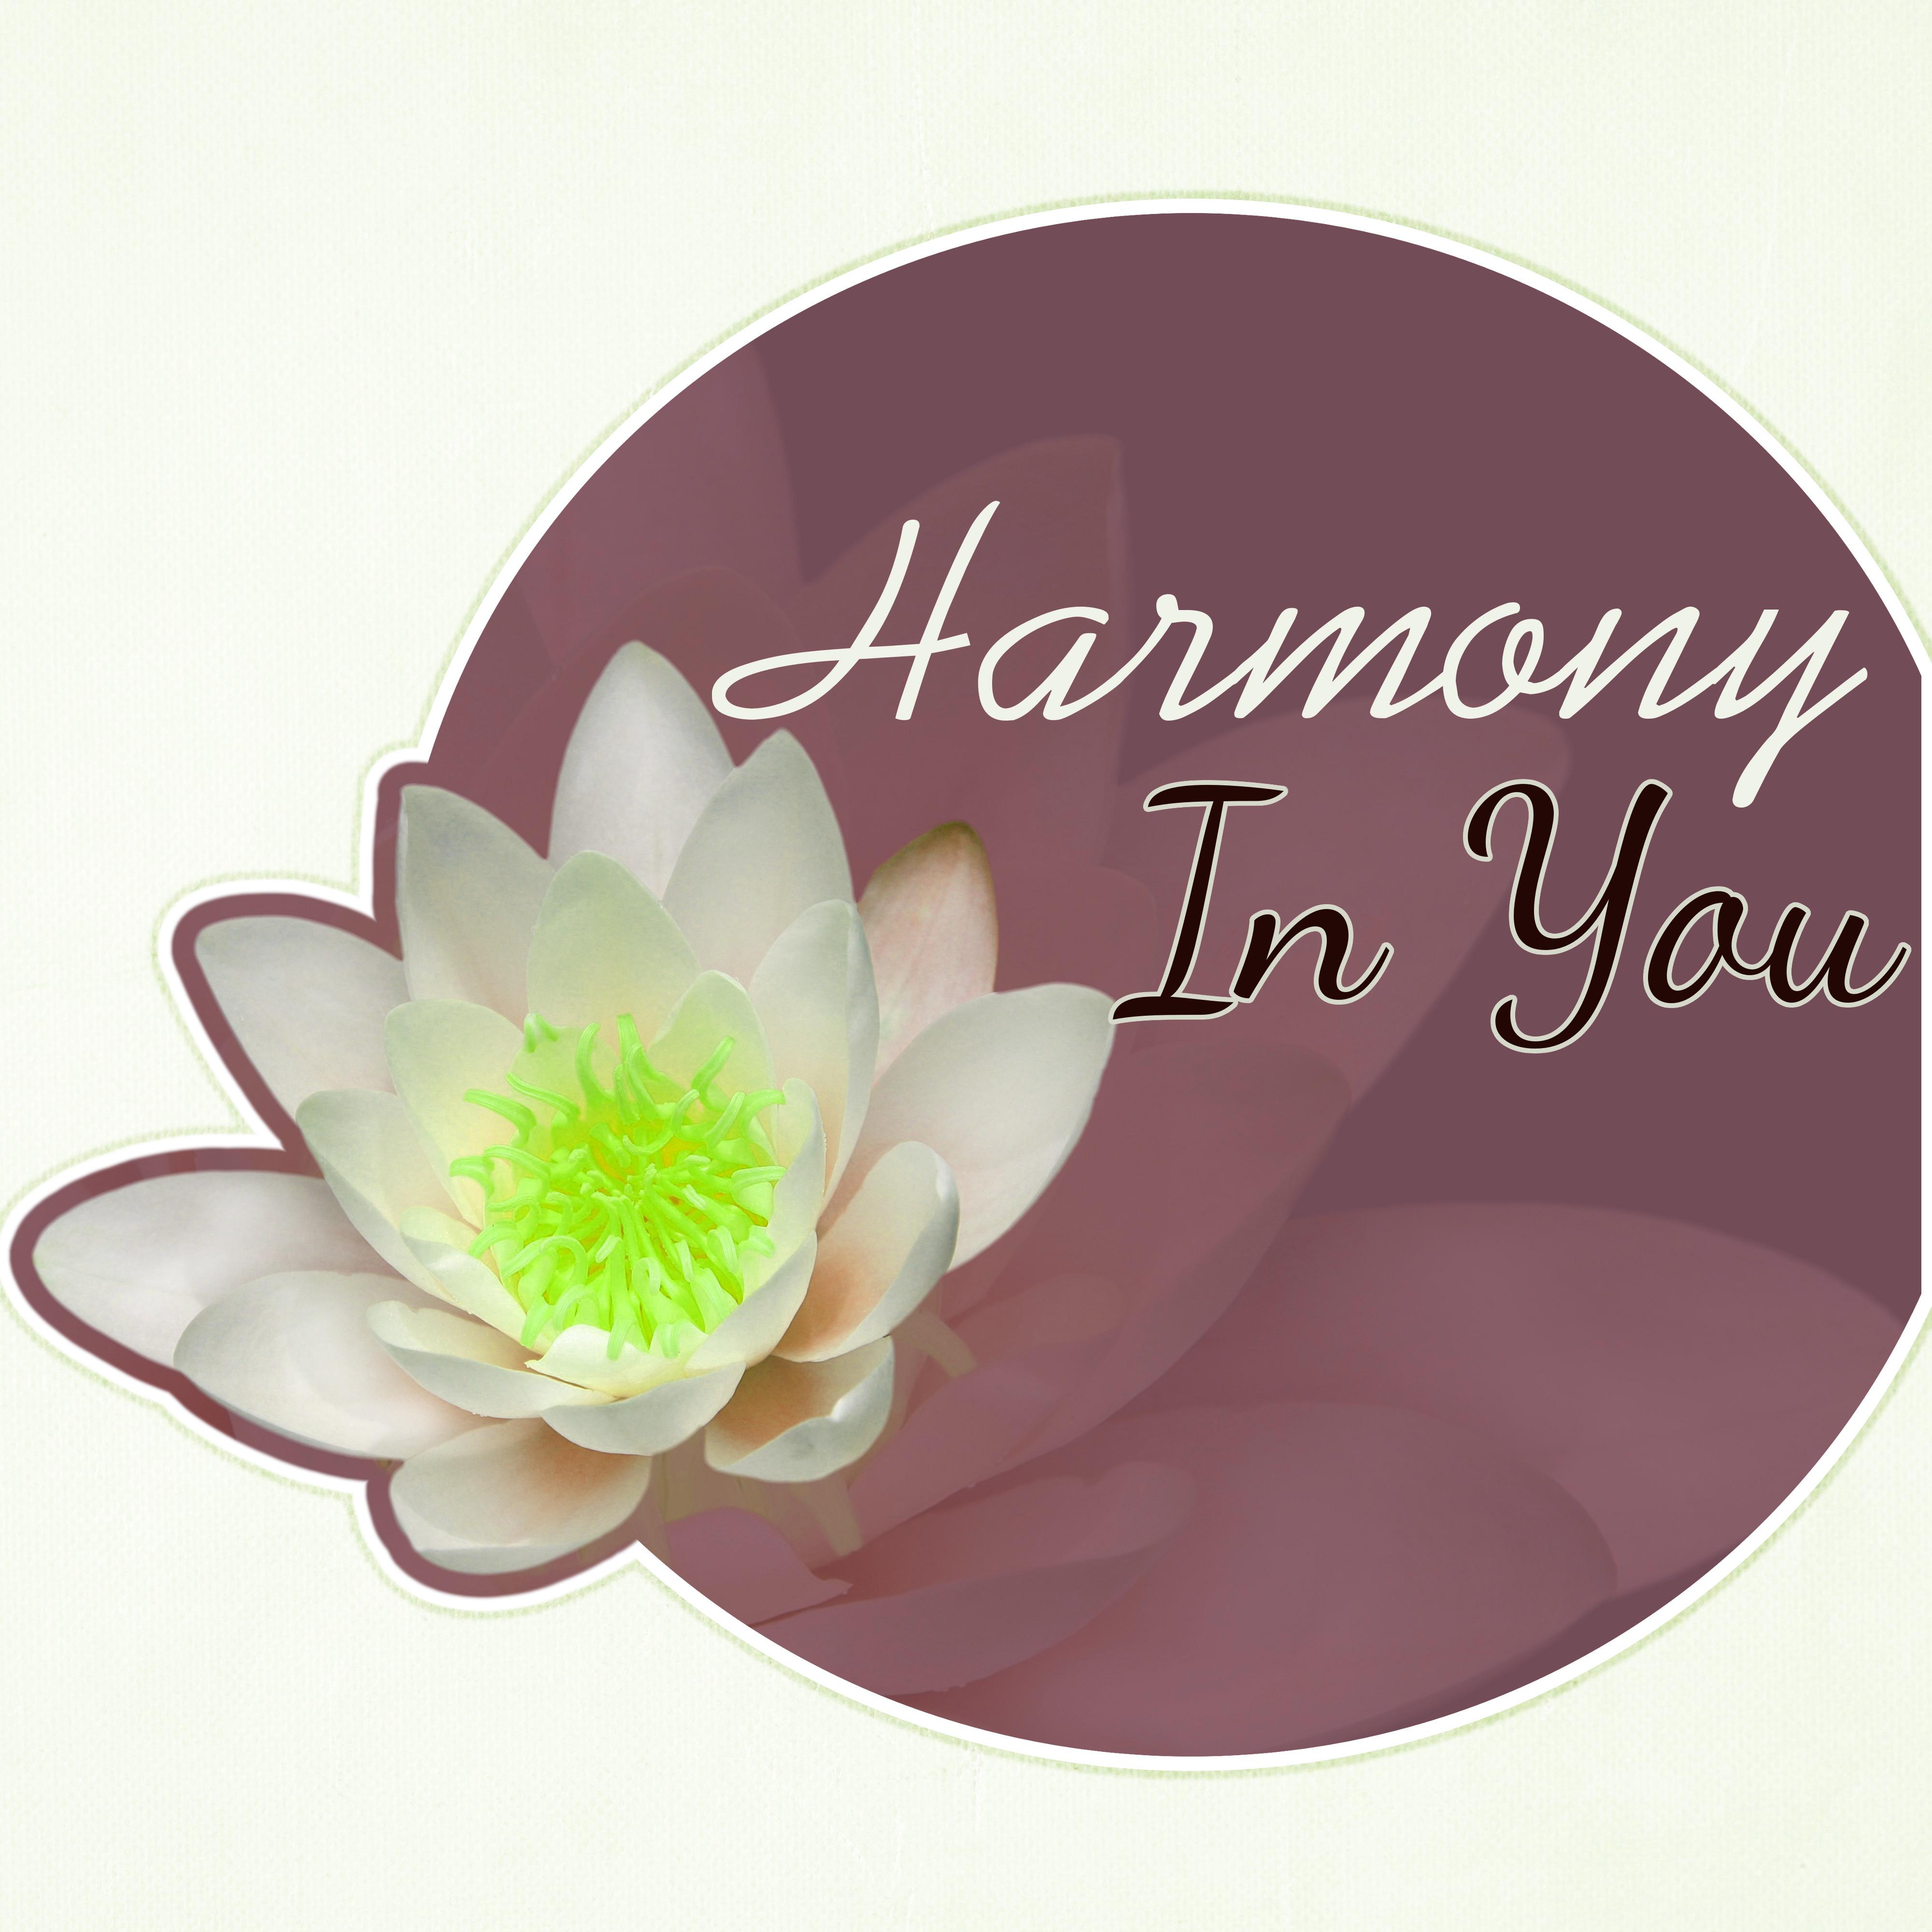 Harmony In You  Deep Massage, Pacific Ocean Waves for Well Being and Healthy Lifestyle, Luxury Spa, Natural Balance, Wellness Spa, Background Music for Relaxing, Mind and Body Harmony